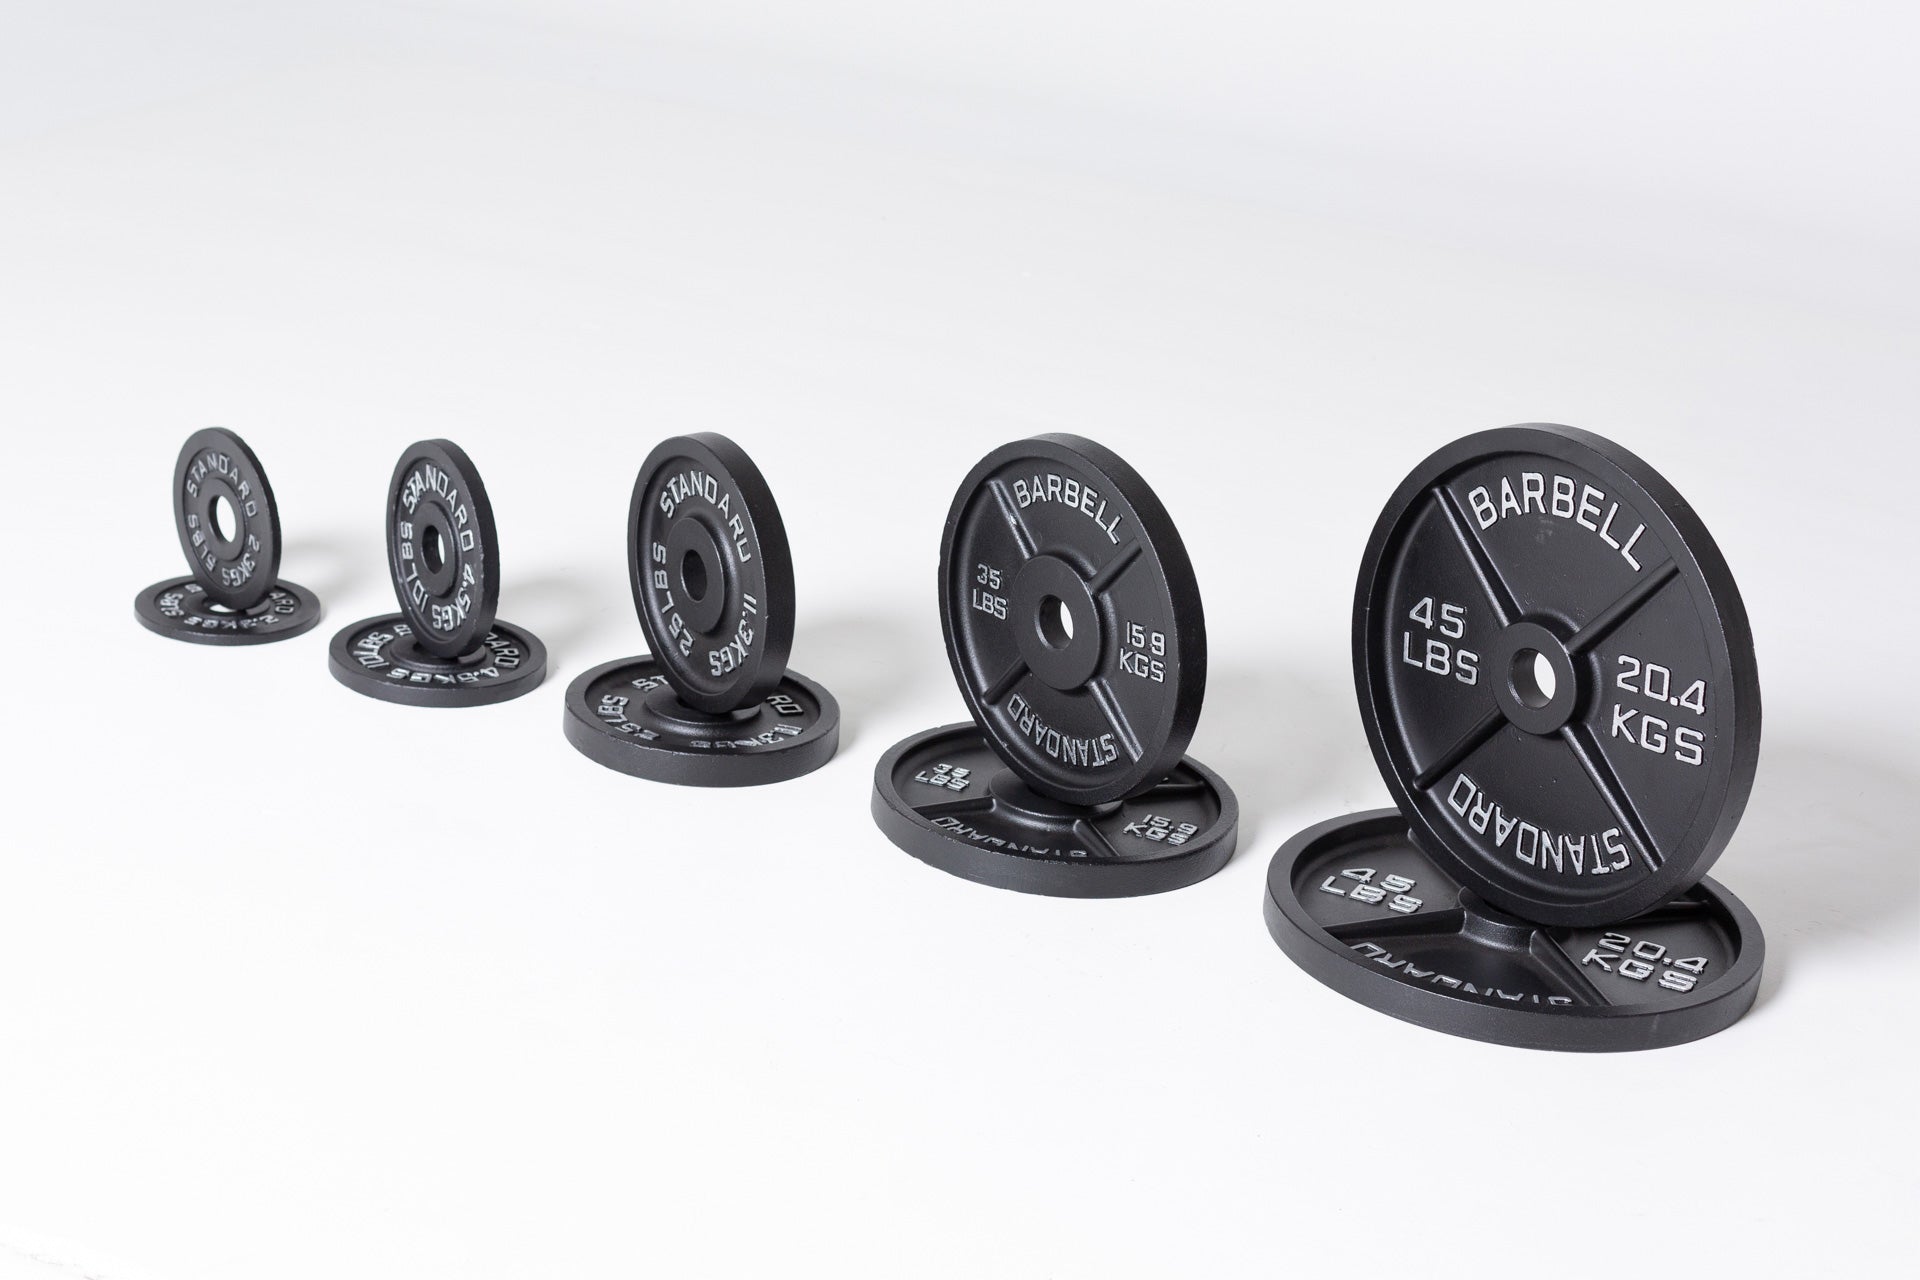 Set of Old School Iron Plate Pairs: 5, 10, 25, 35, and 45lb pairs.